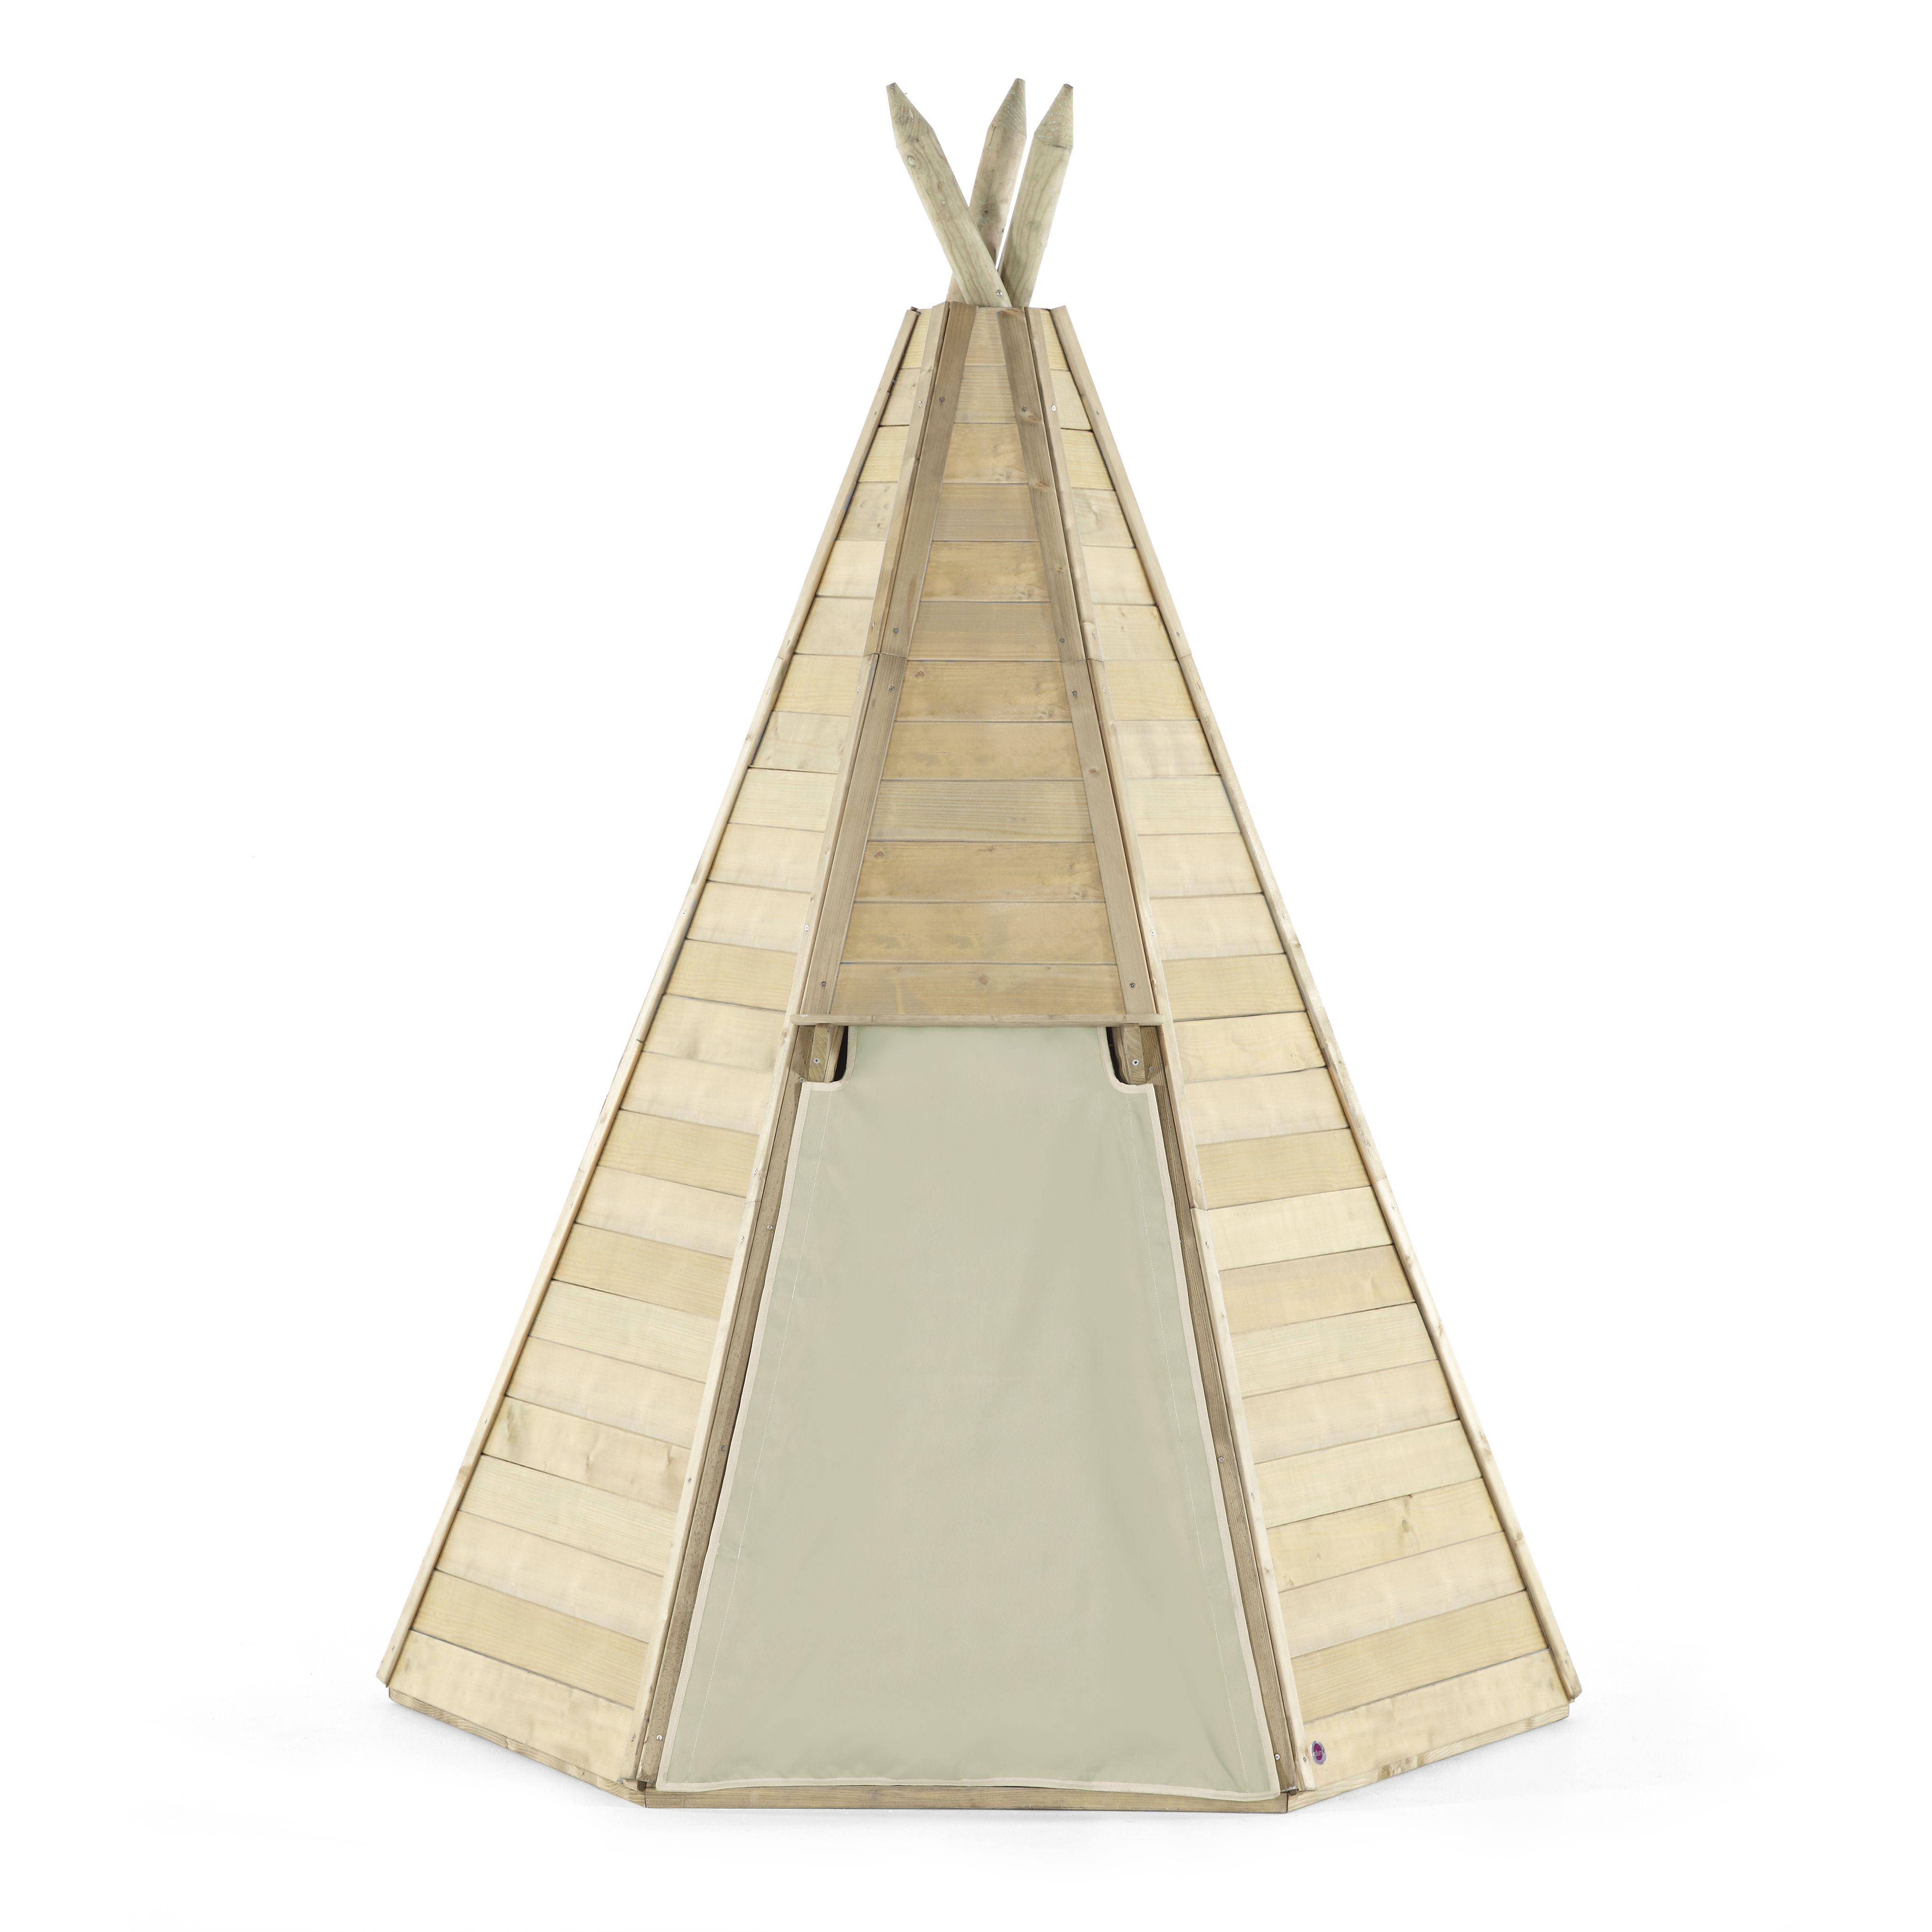 L150 x W150 Outdoor Wooden Teepee with base